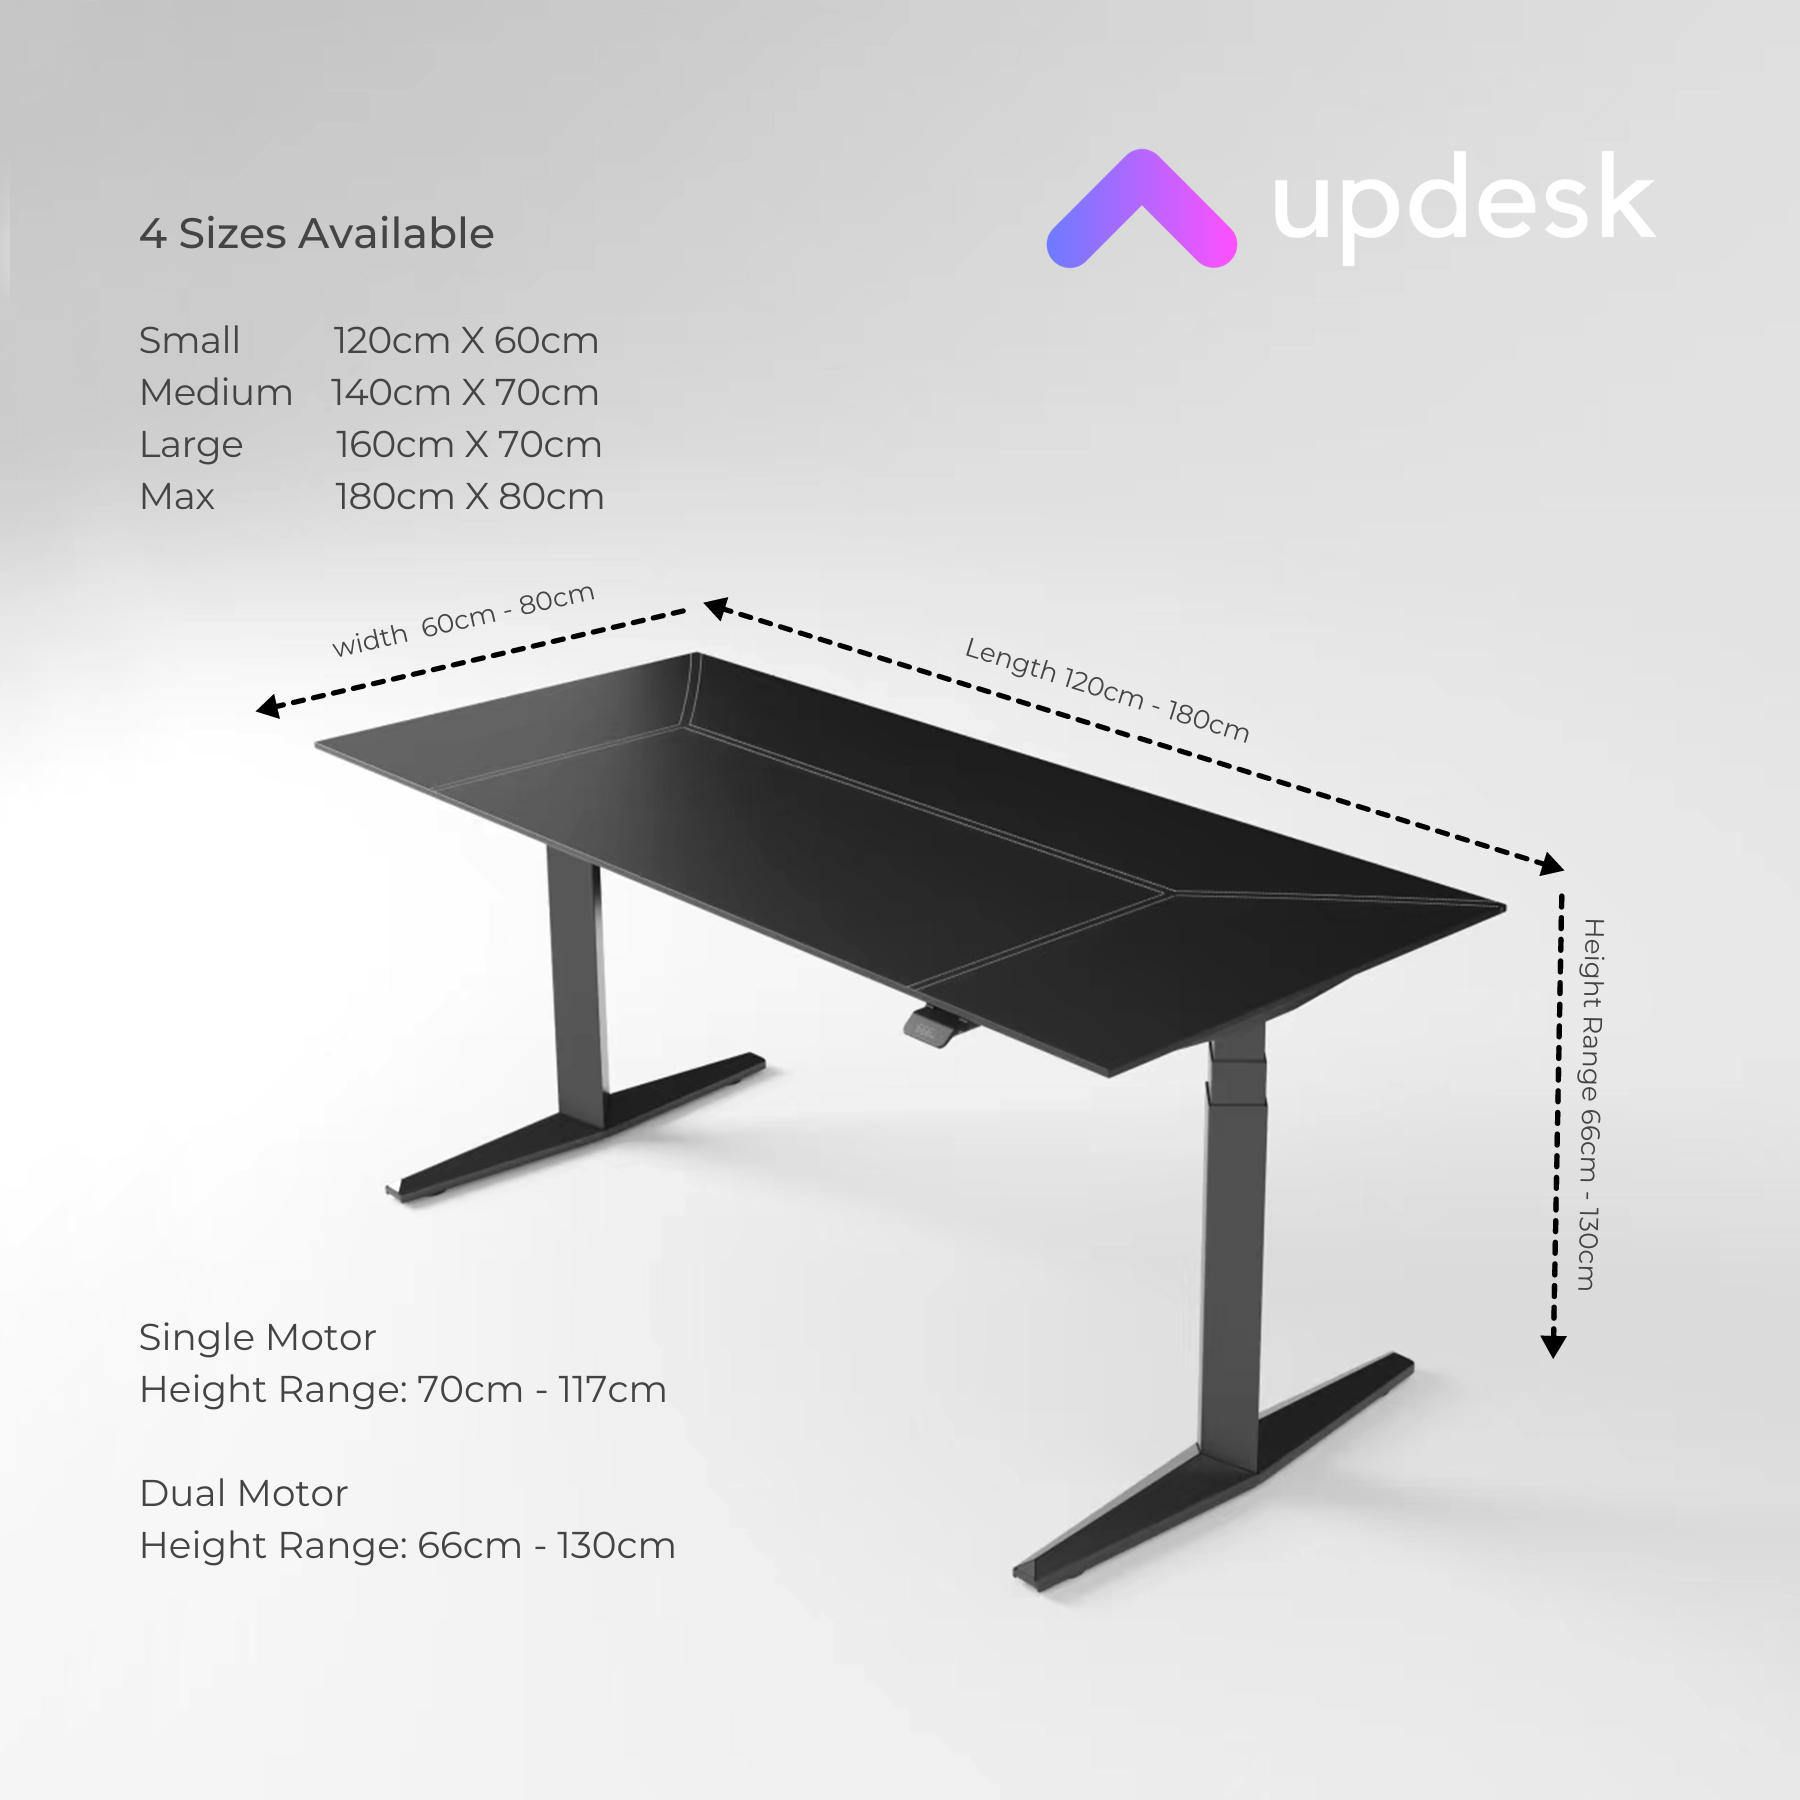 Updesk LUX: Premium Leather Height Office Adjustable Table